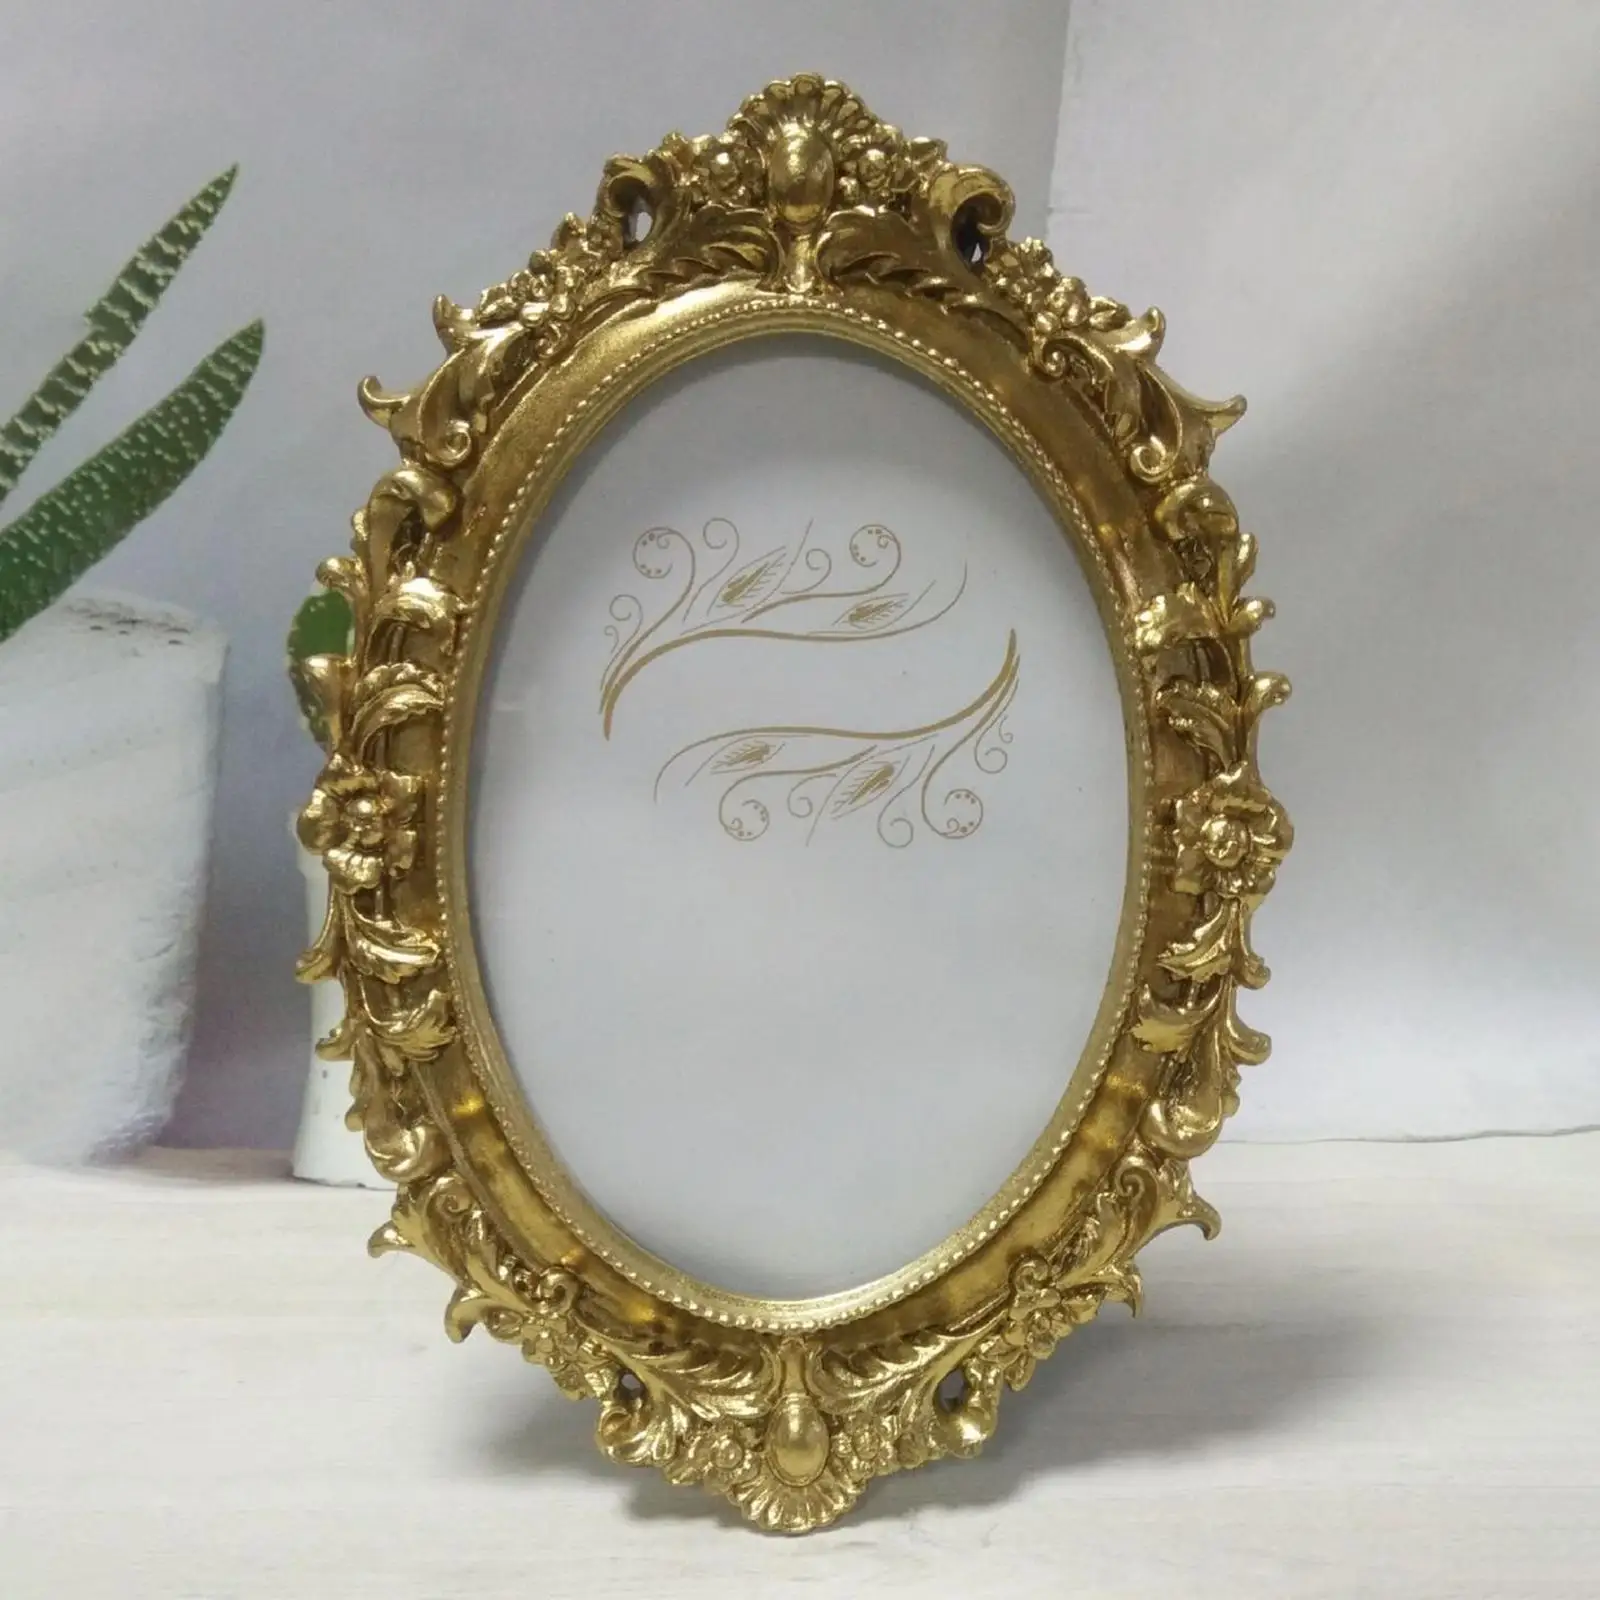 Antique Photo Frame Tabletop Wall Hanging Carved Ornate Table Ornament Oval Picture Frame for Party Bedroom Hallway Home Desktop